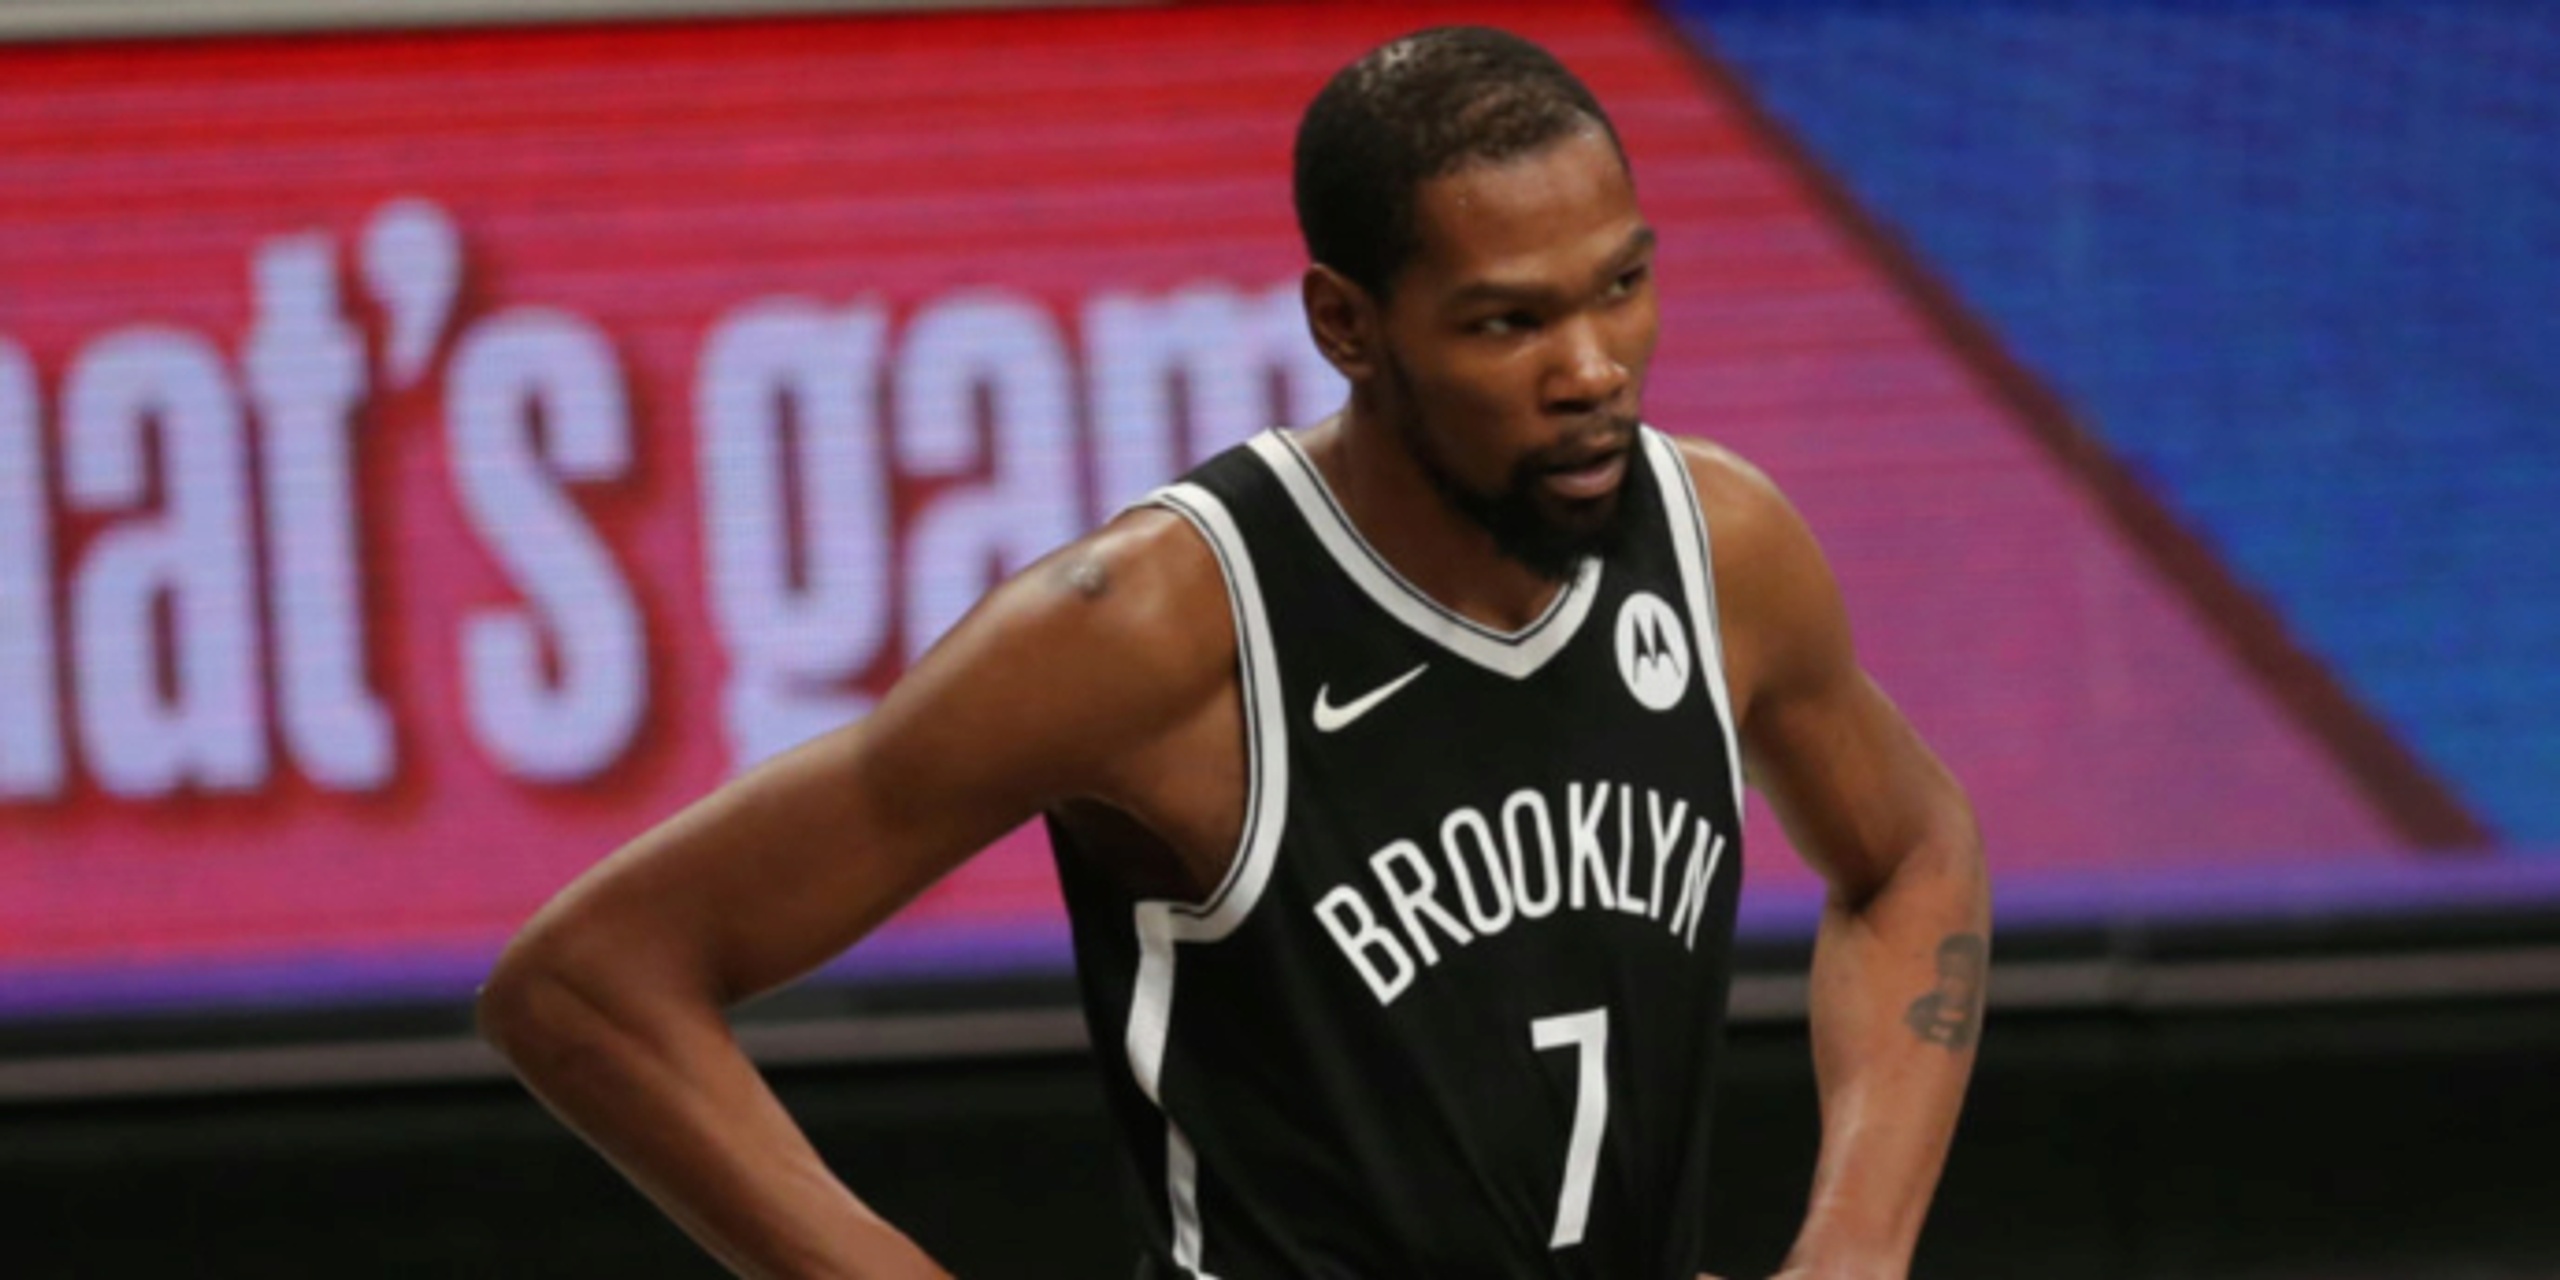 Can Kevin Durant carry the load enough to get the Nets over the hump?